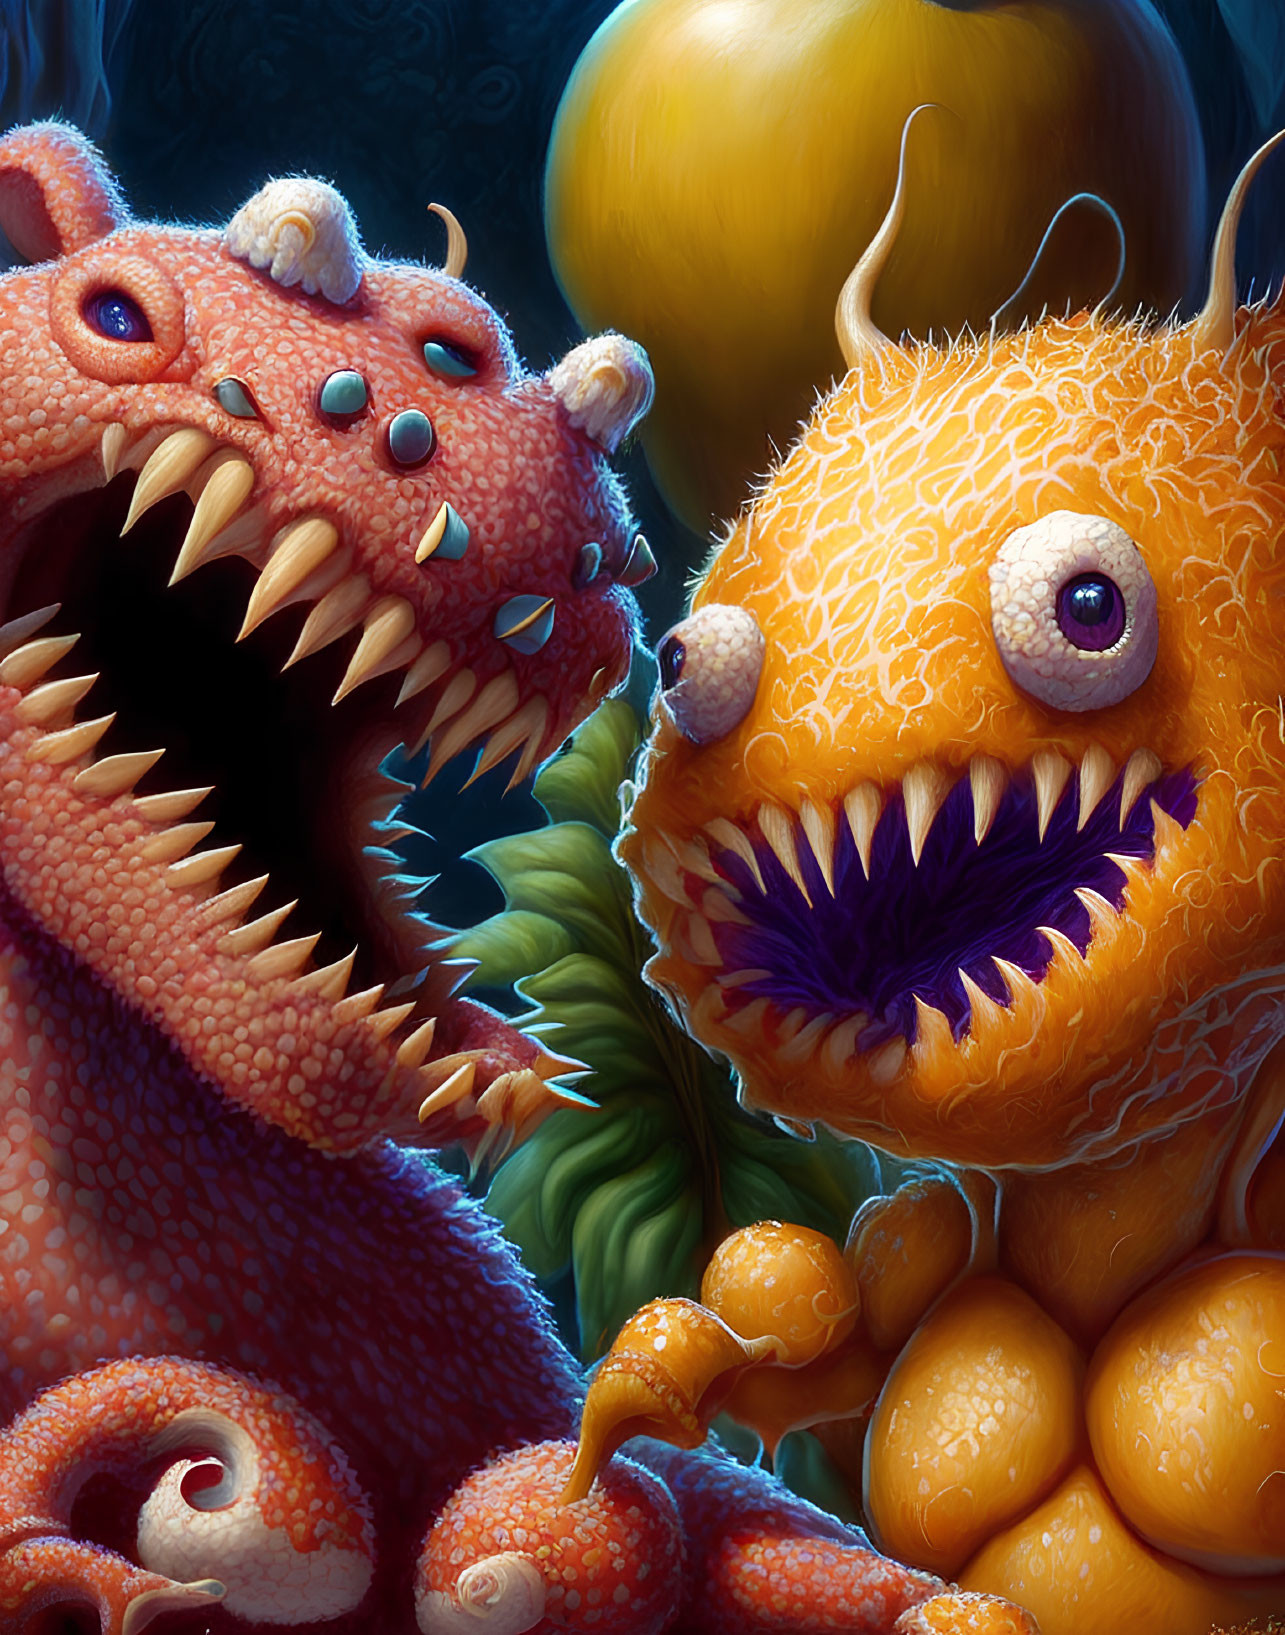 Colorful Cartoonish Monsters with Large Eyes and Teeth on Dark Background